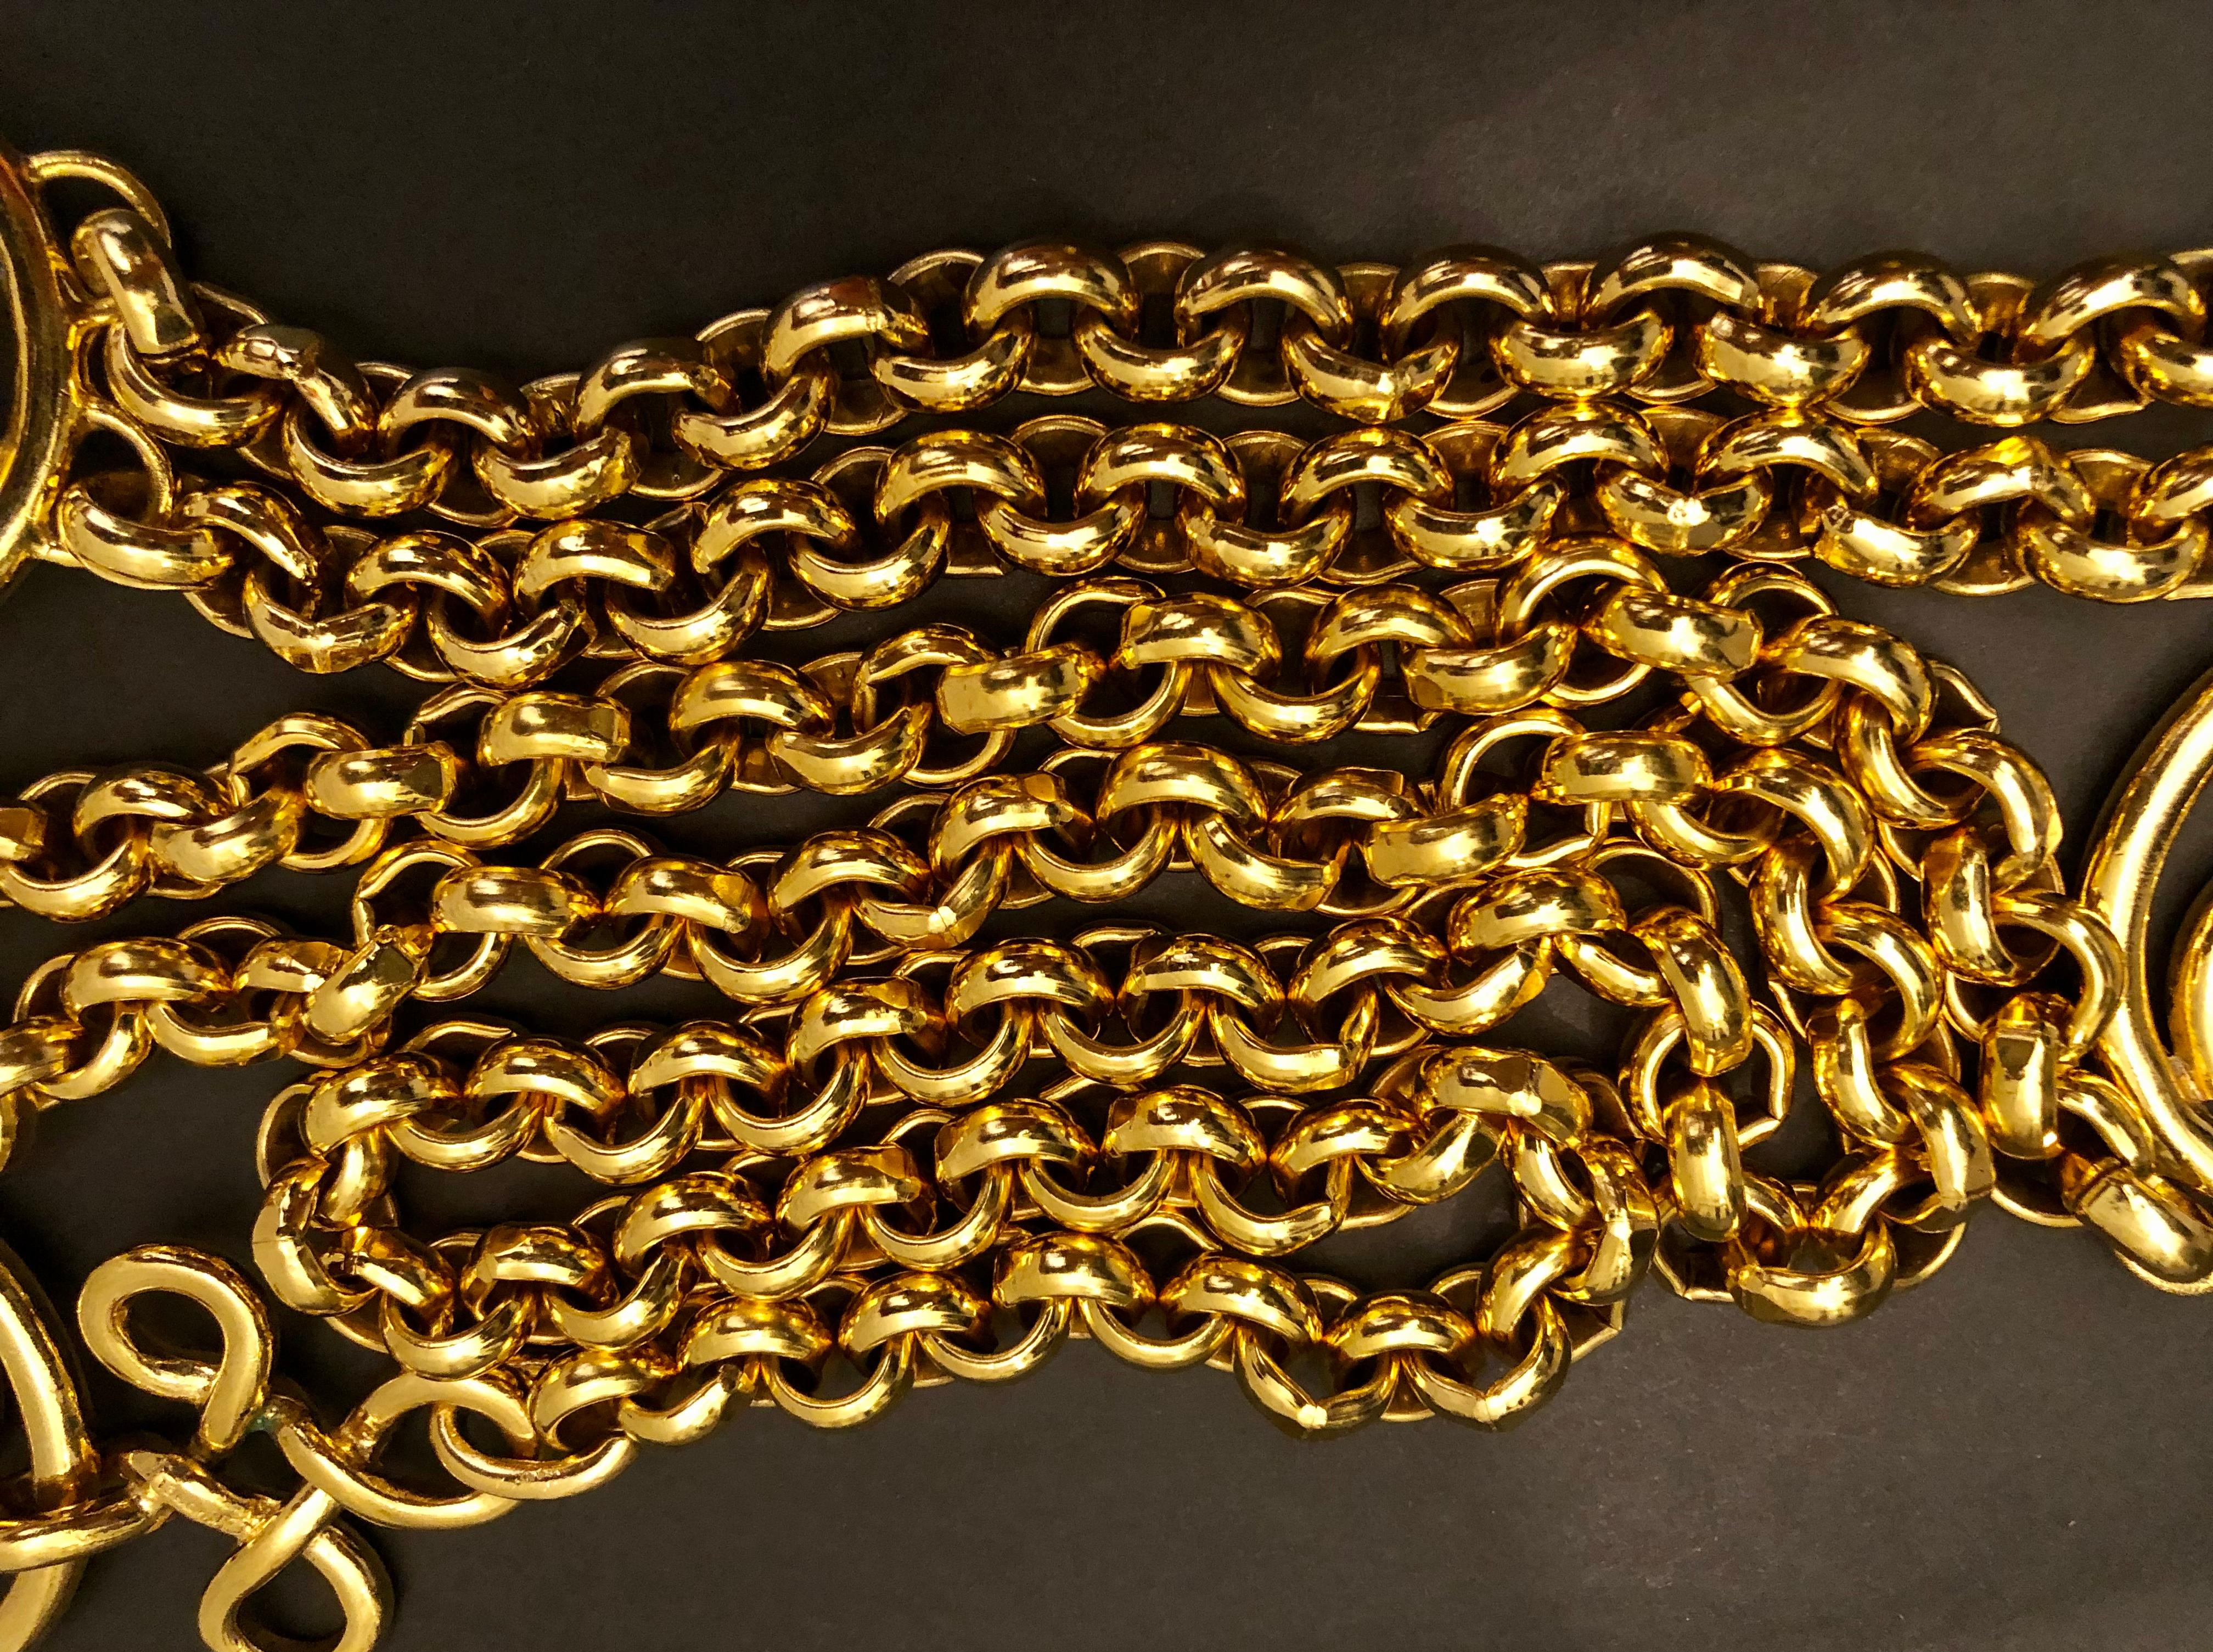 1993 Vintage CHANEL Gold Toned Clover CC Chain Belt 42 Inches Long For Sale 9